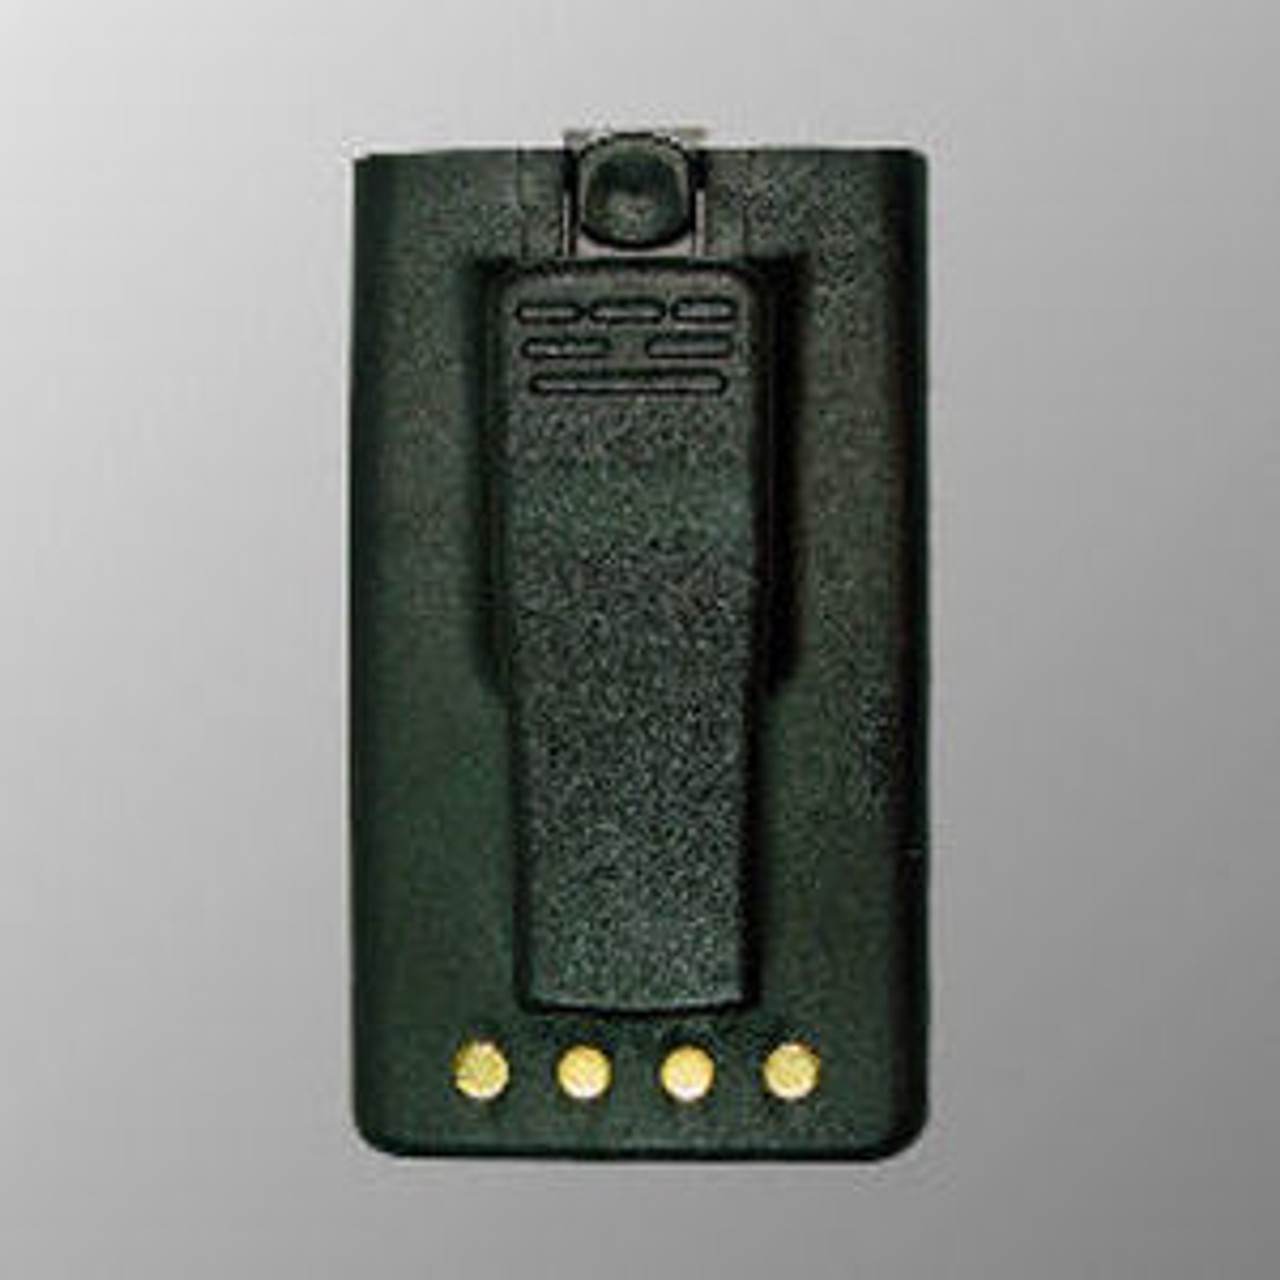 Relm RPV3600 Lithium-Ion Battery - 1800mAh